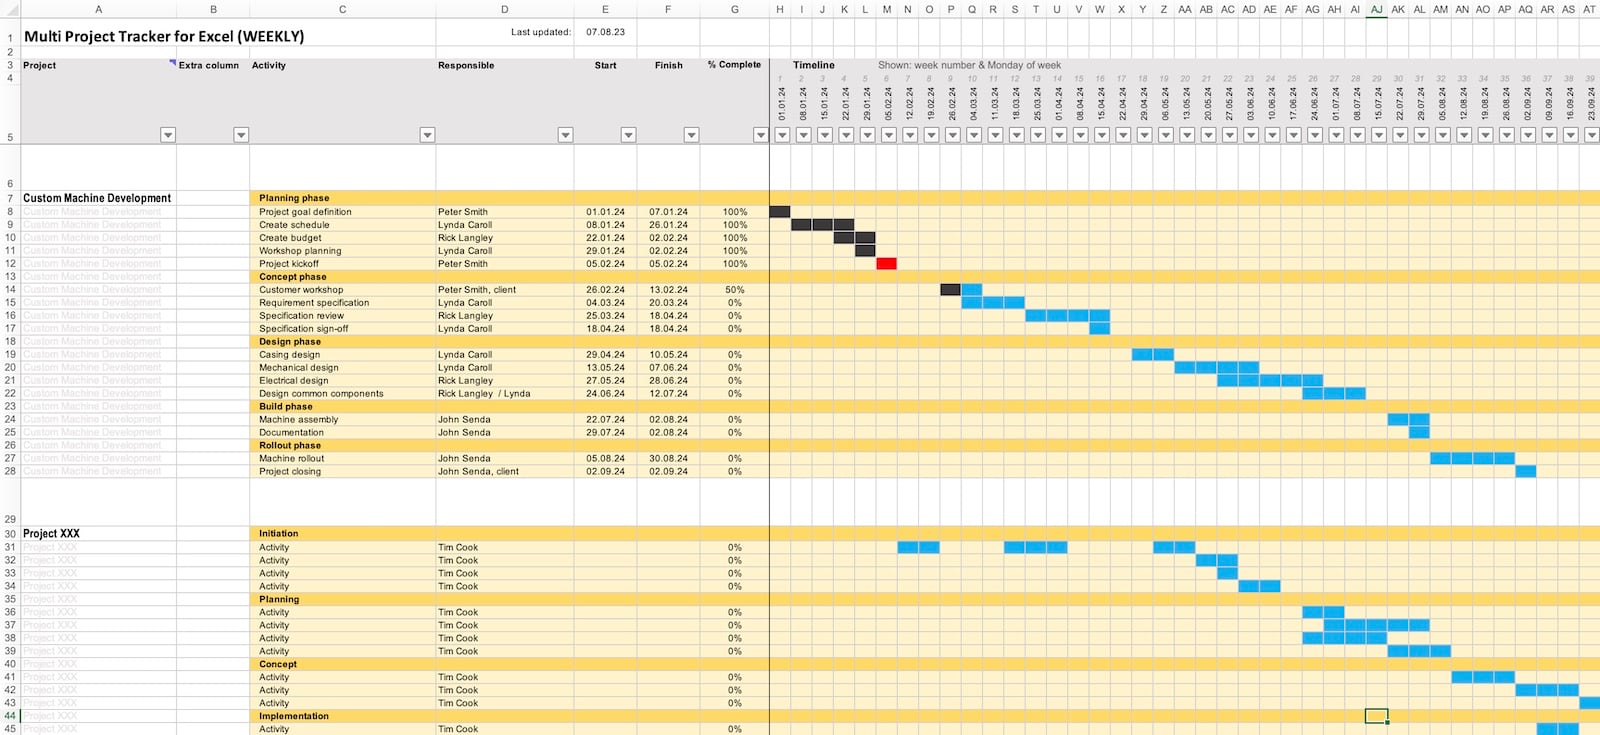 The Multi-Project Tracker enables you to maintain an overview of ongoing projects using a single Excel spreadsheet. The template can be adjusted based on your needs.